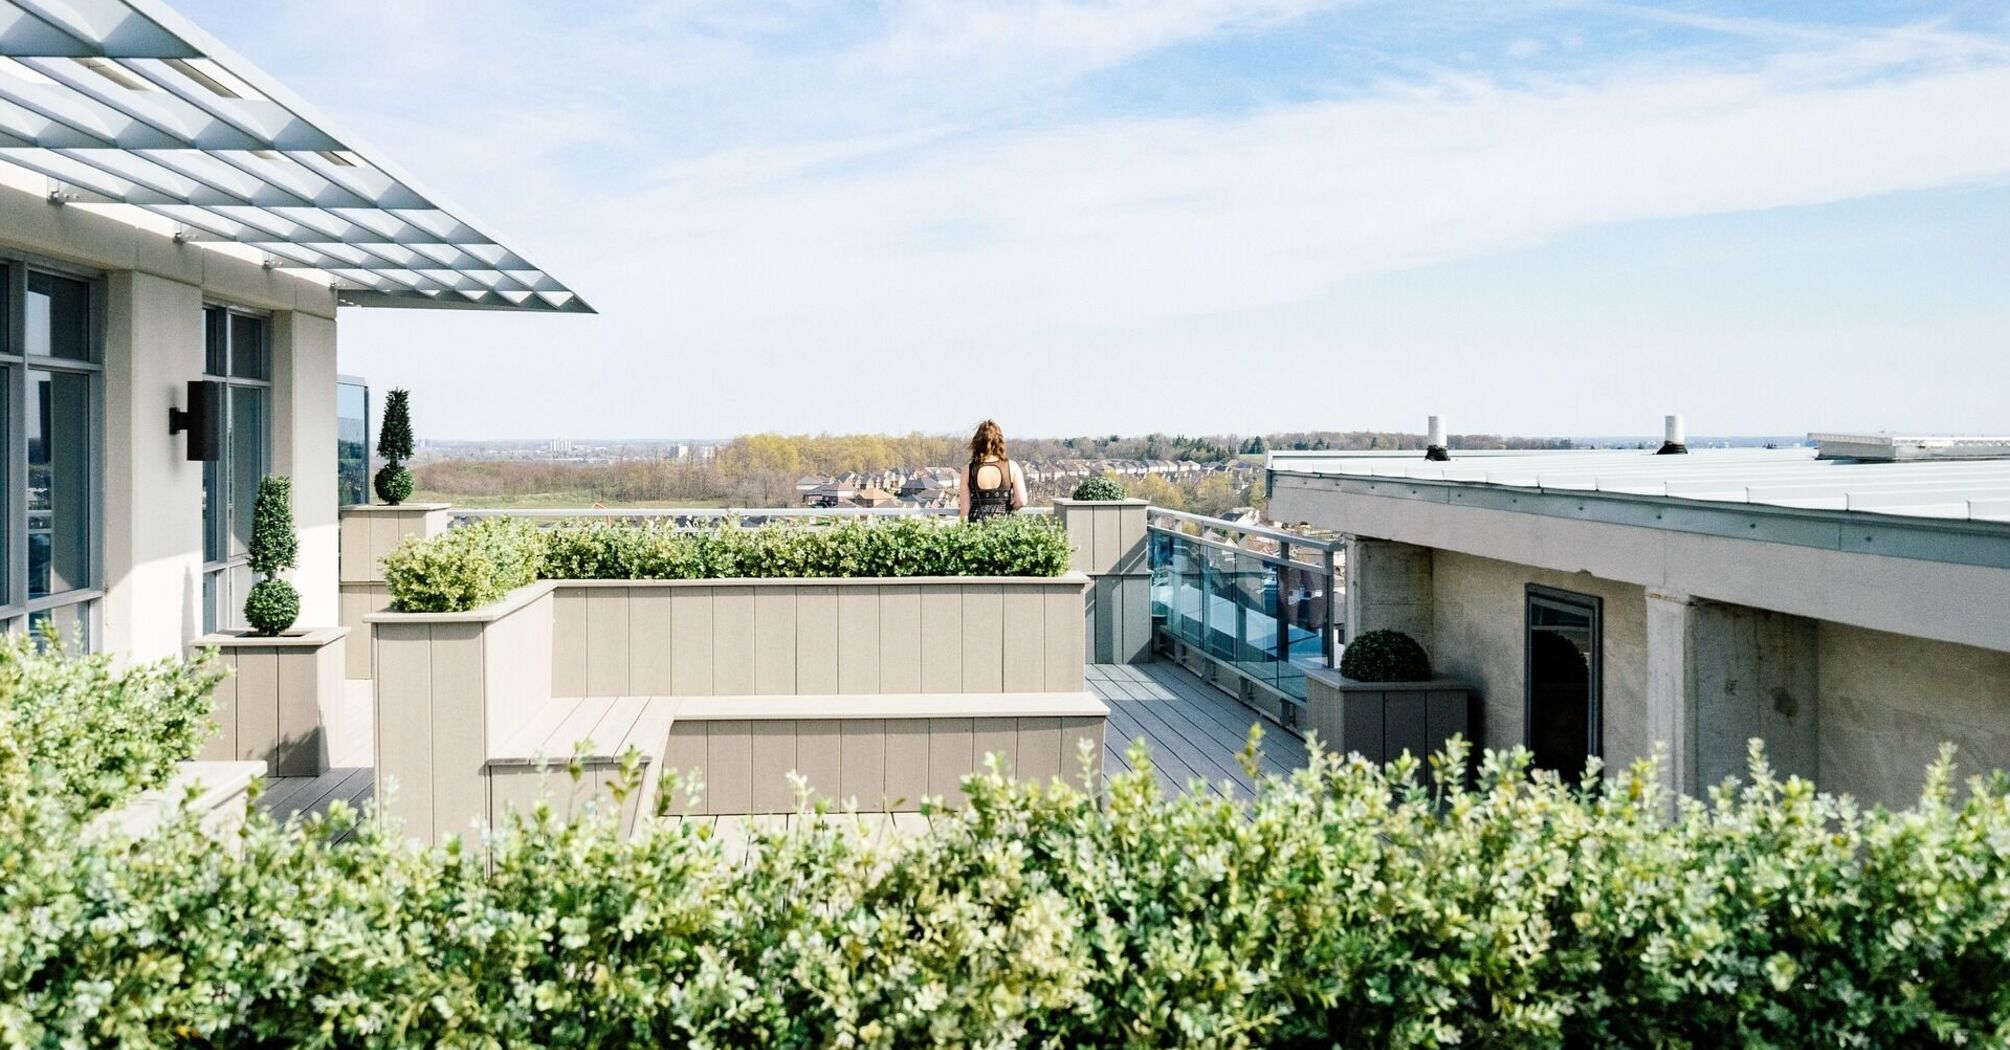 Sustainable rooftop garden with solar panels and cityscape view